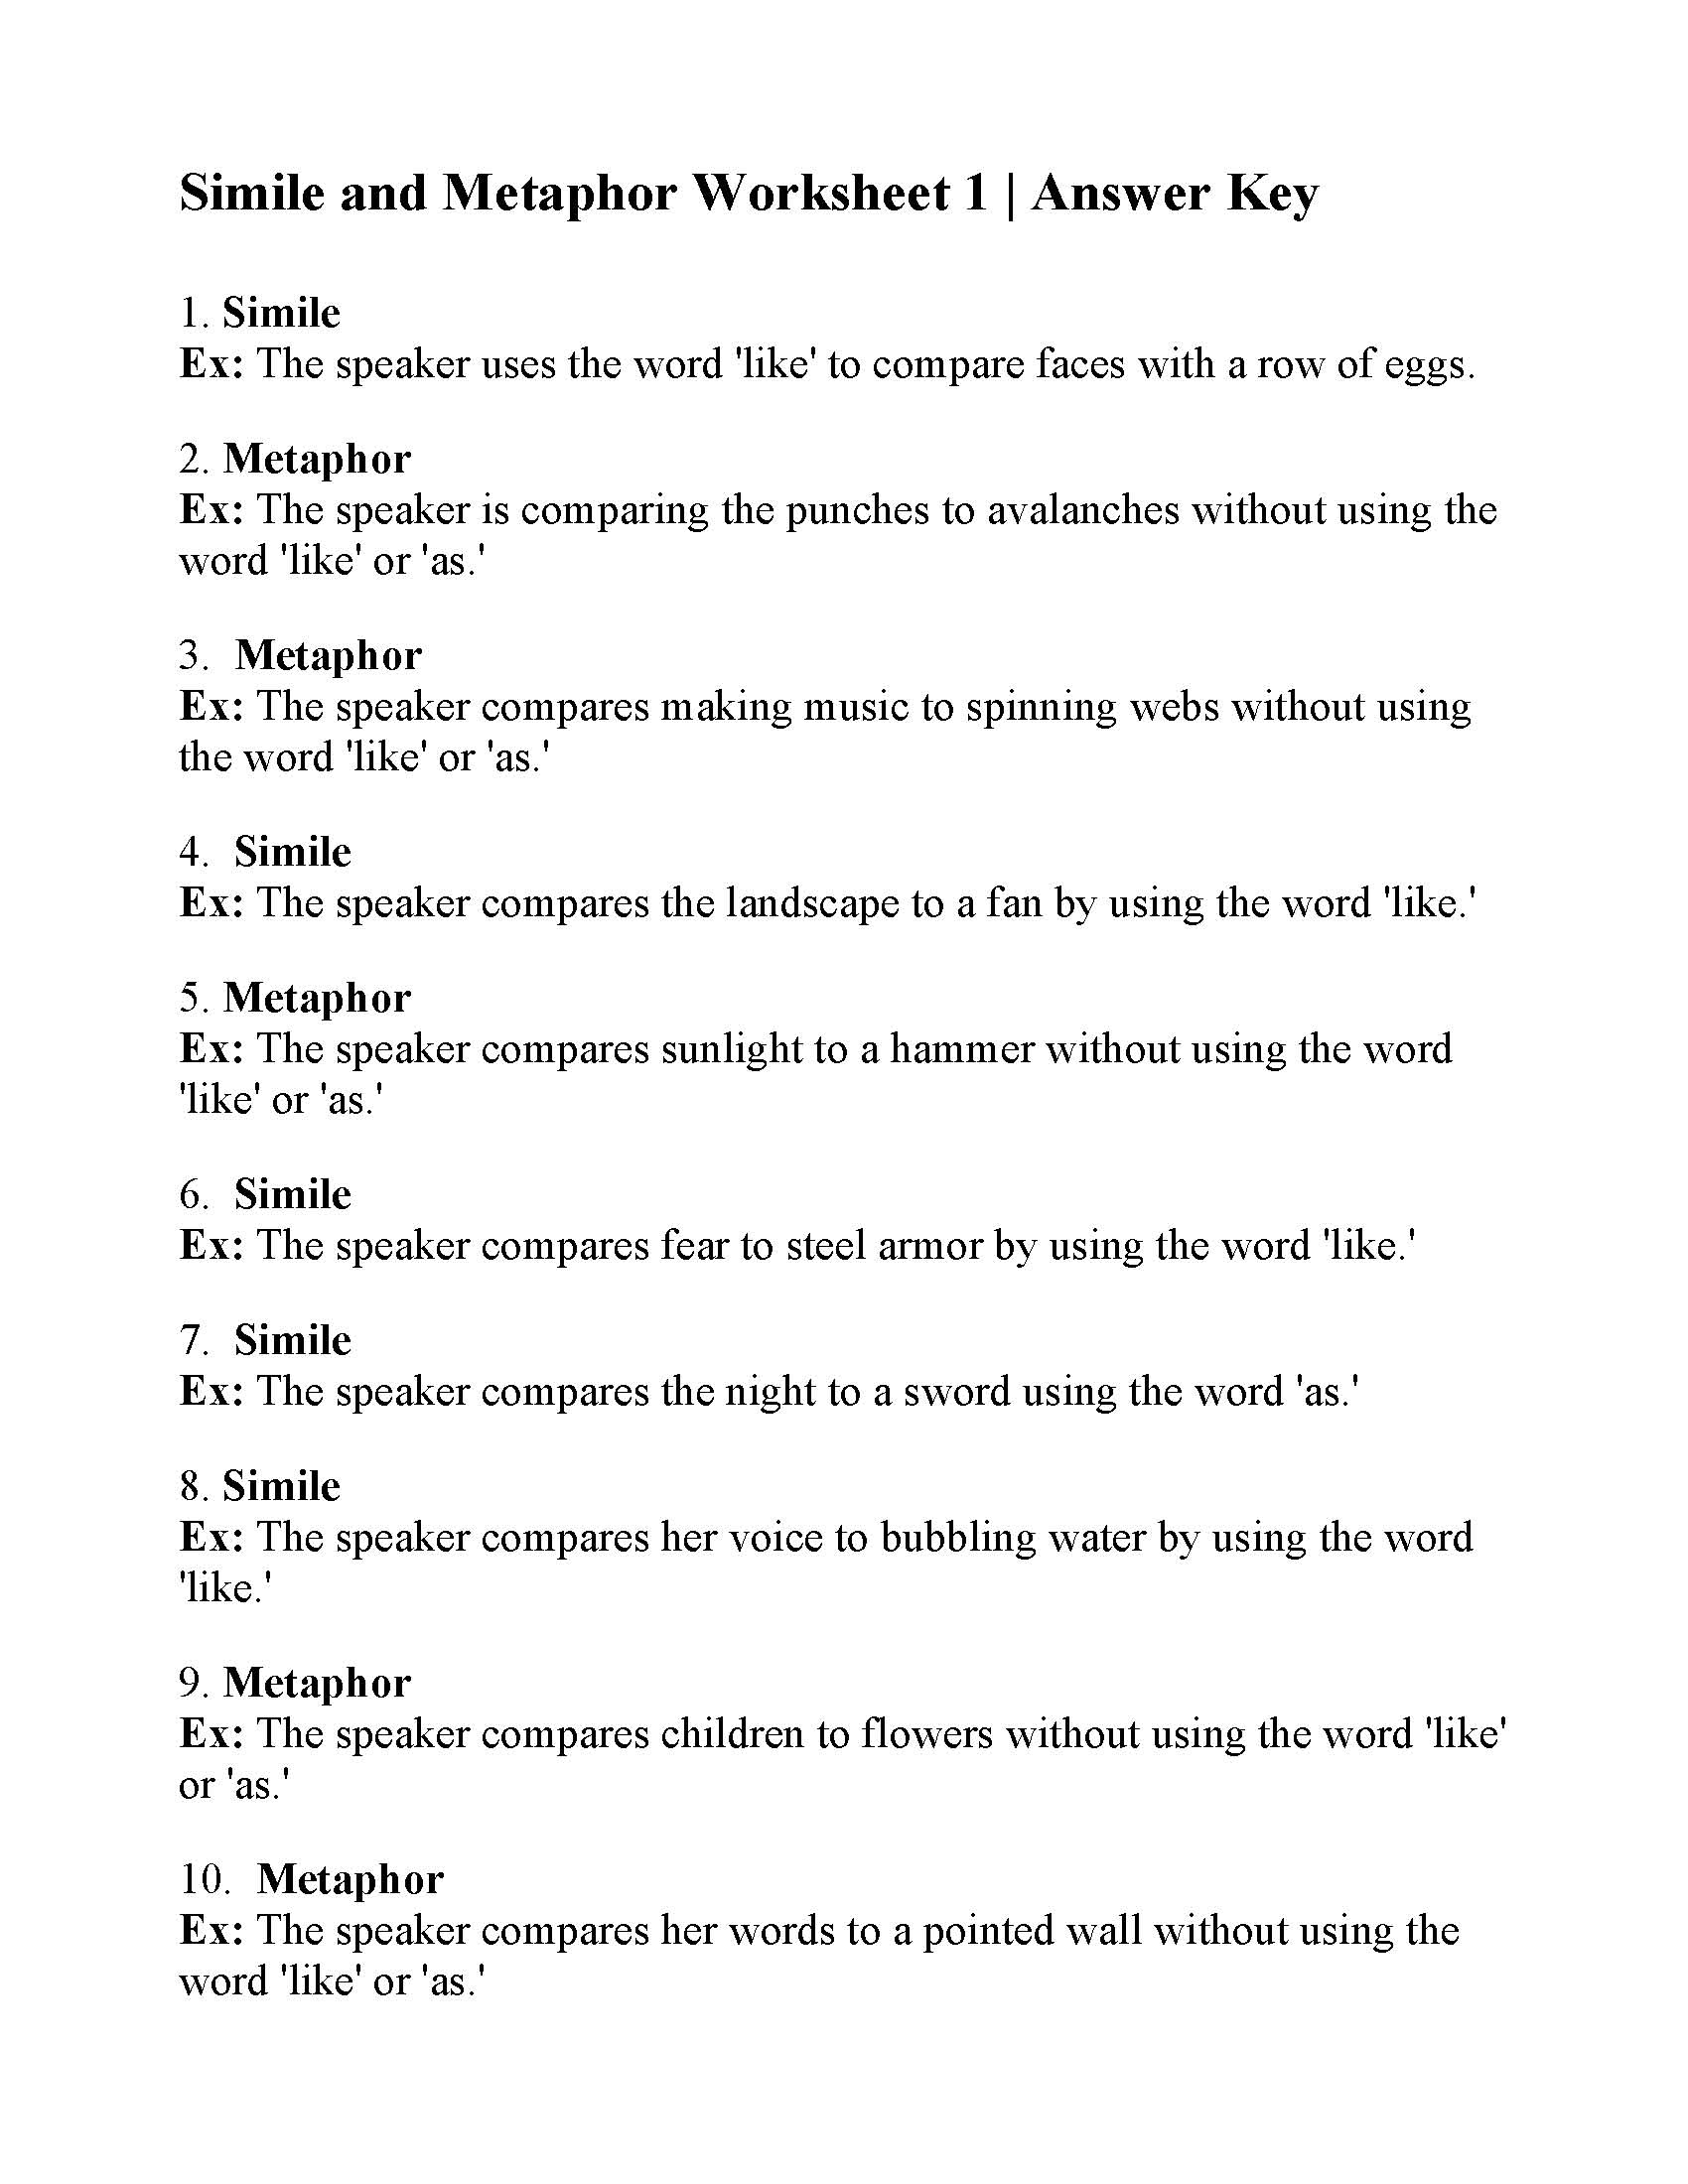 What Is A Metaphor Worksheet Answer Key